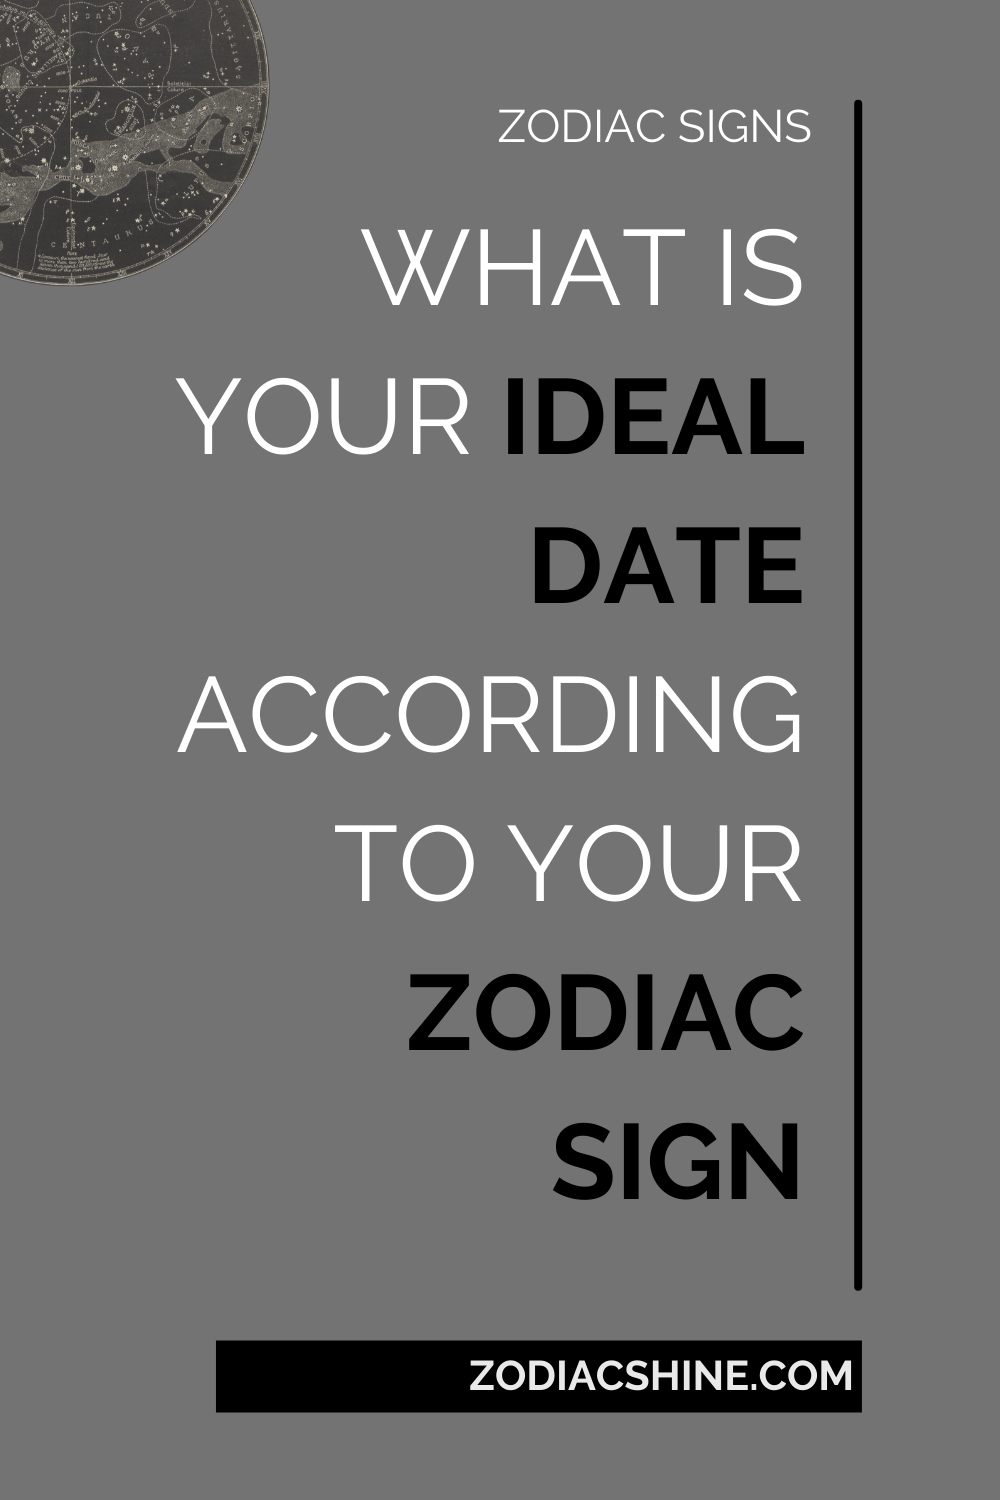 What Is Your Ideal Date According To Your Zodiac Sign